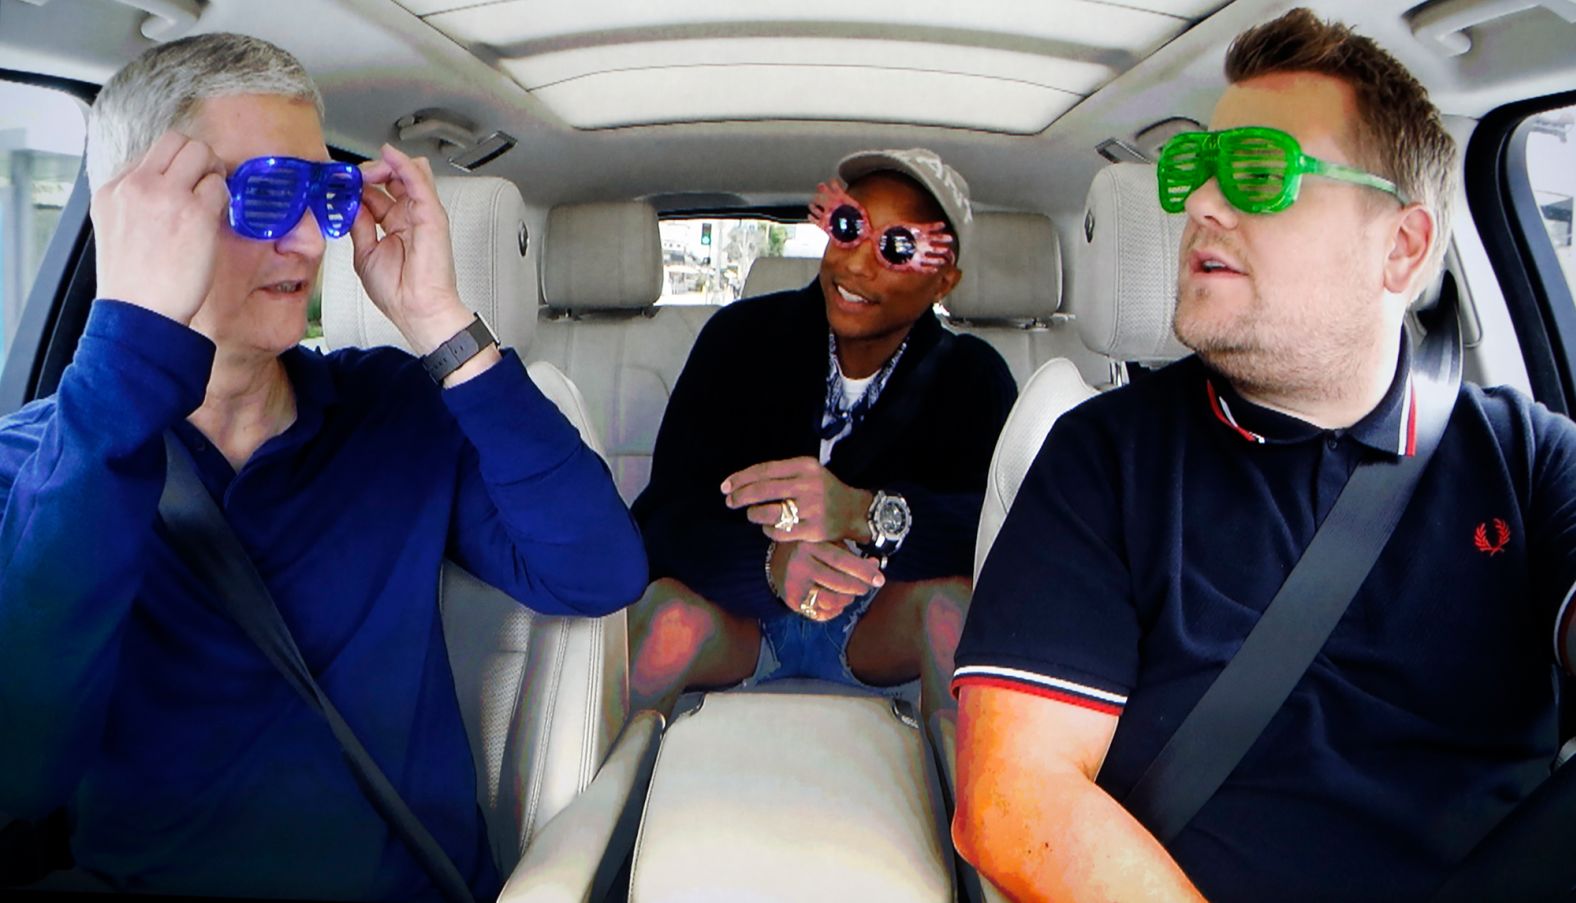 Cook is with James Corden and Pharrell during a taped comedy bit shown on a projection screen during an Apple event in San Francisco in September 2016.